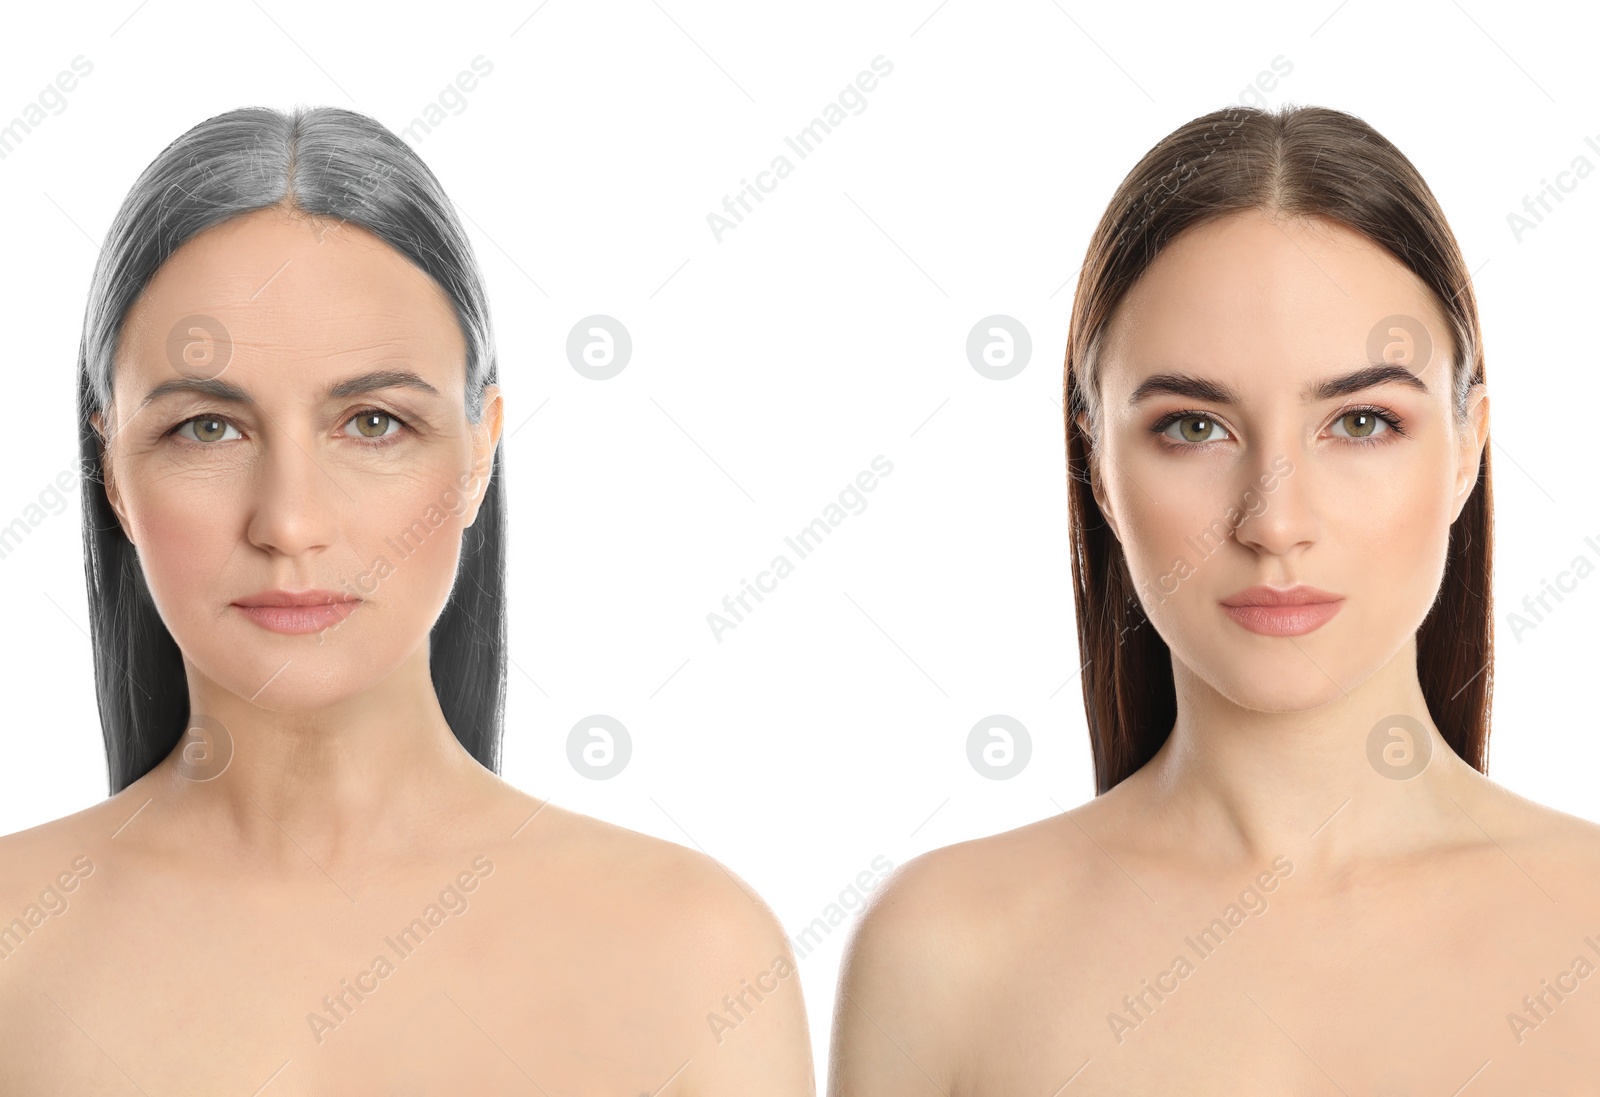 Image of Natural aging, comparison. Portraits of woman in young and old ages on white background